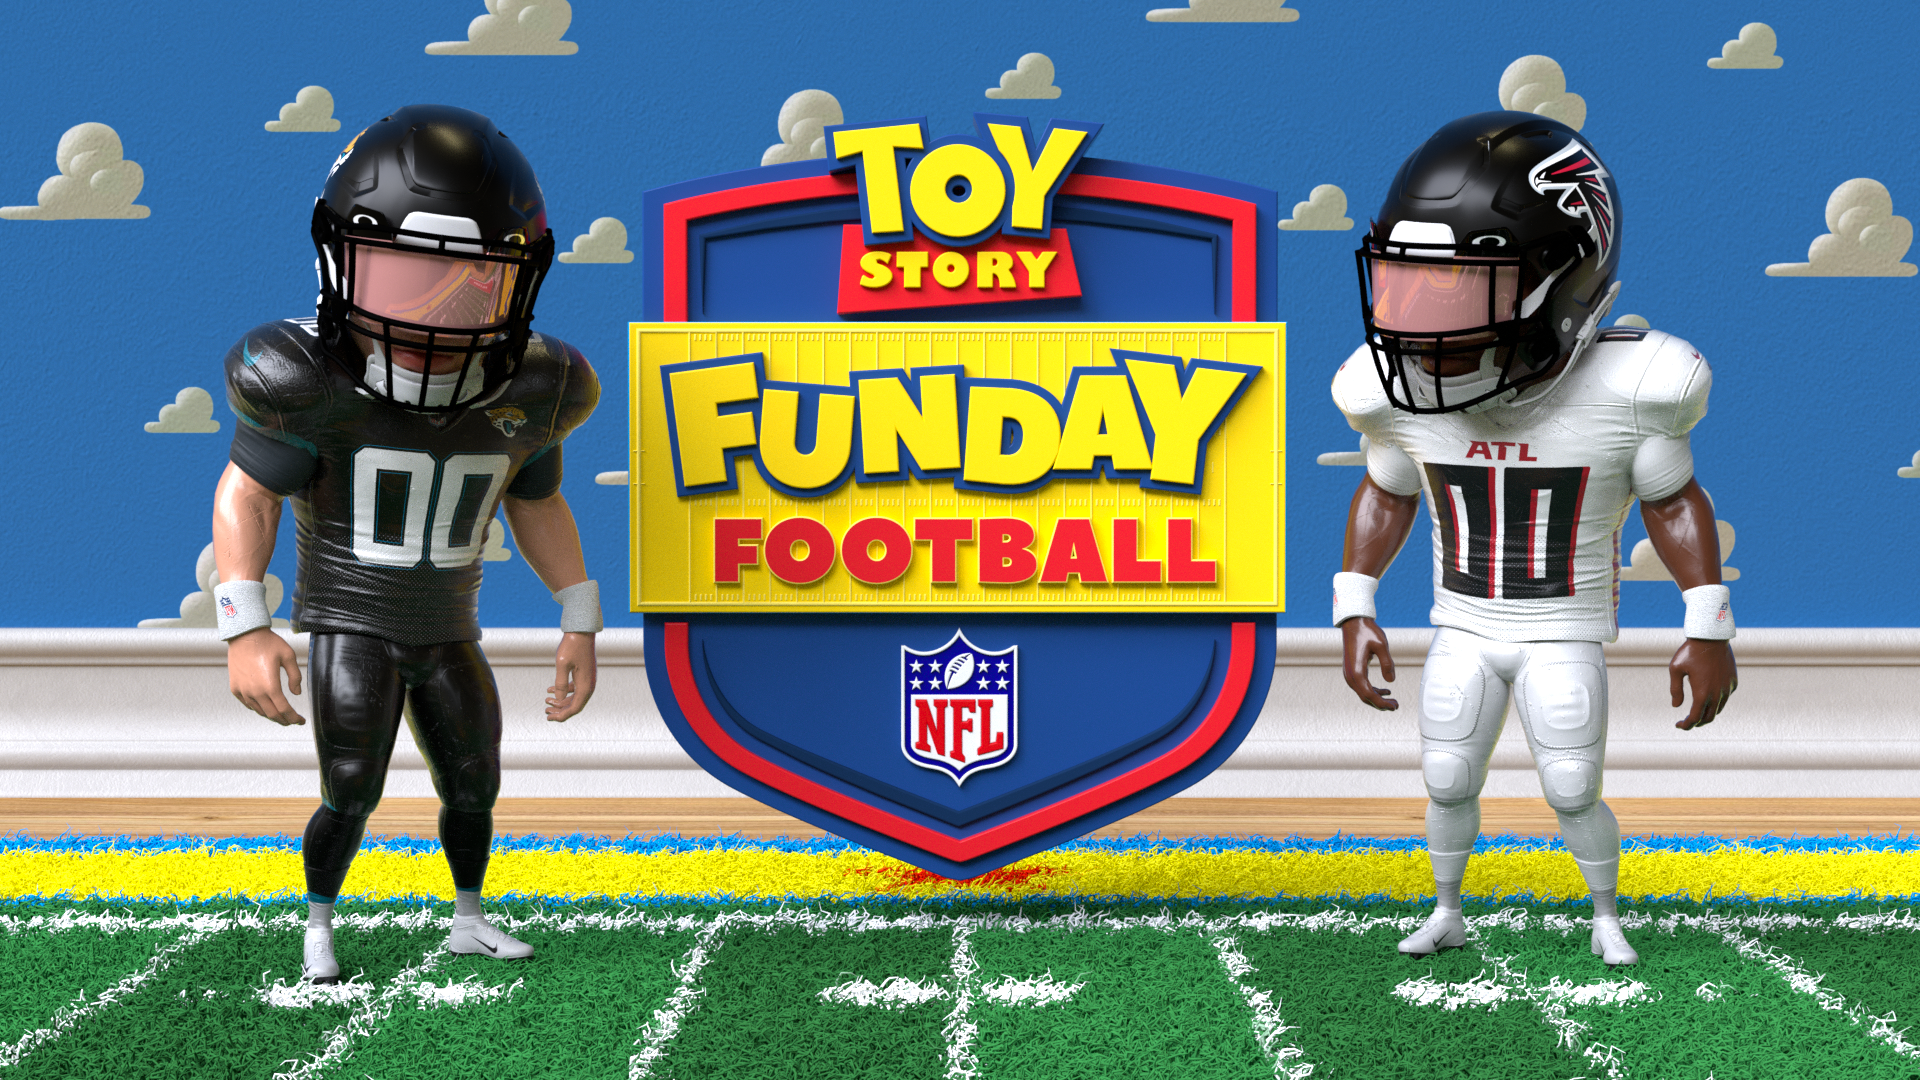 Toy Story live football broadcast brings animated version to viewers